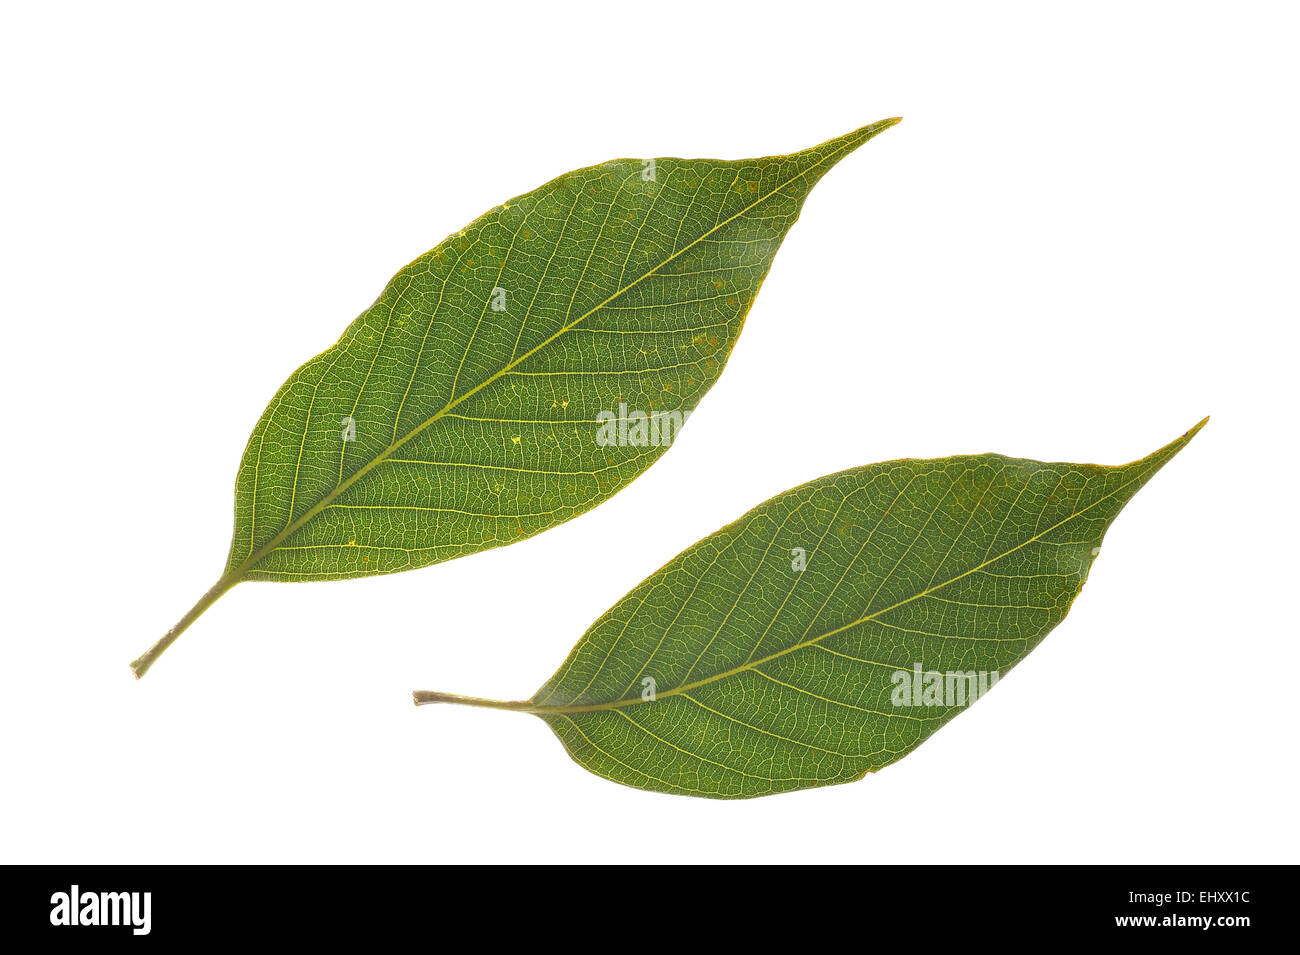 Japanese evergreen oak (Quercus acuta) close up of leaves, native to China and Japan against white background Stock Photo